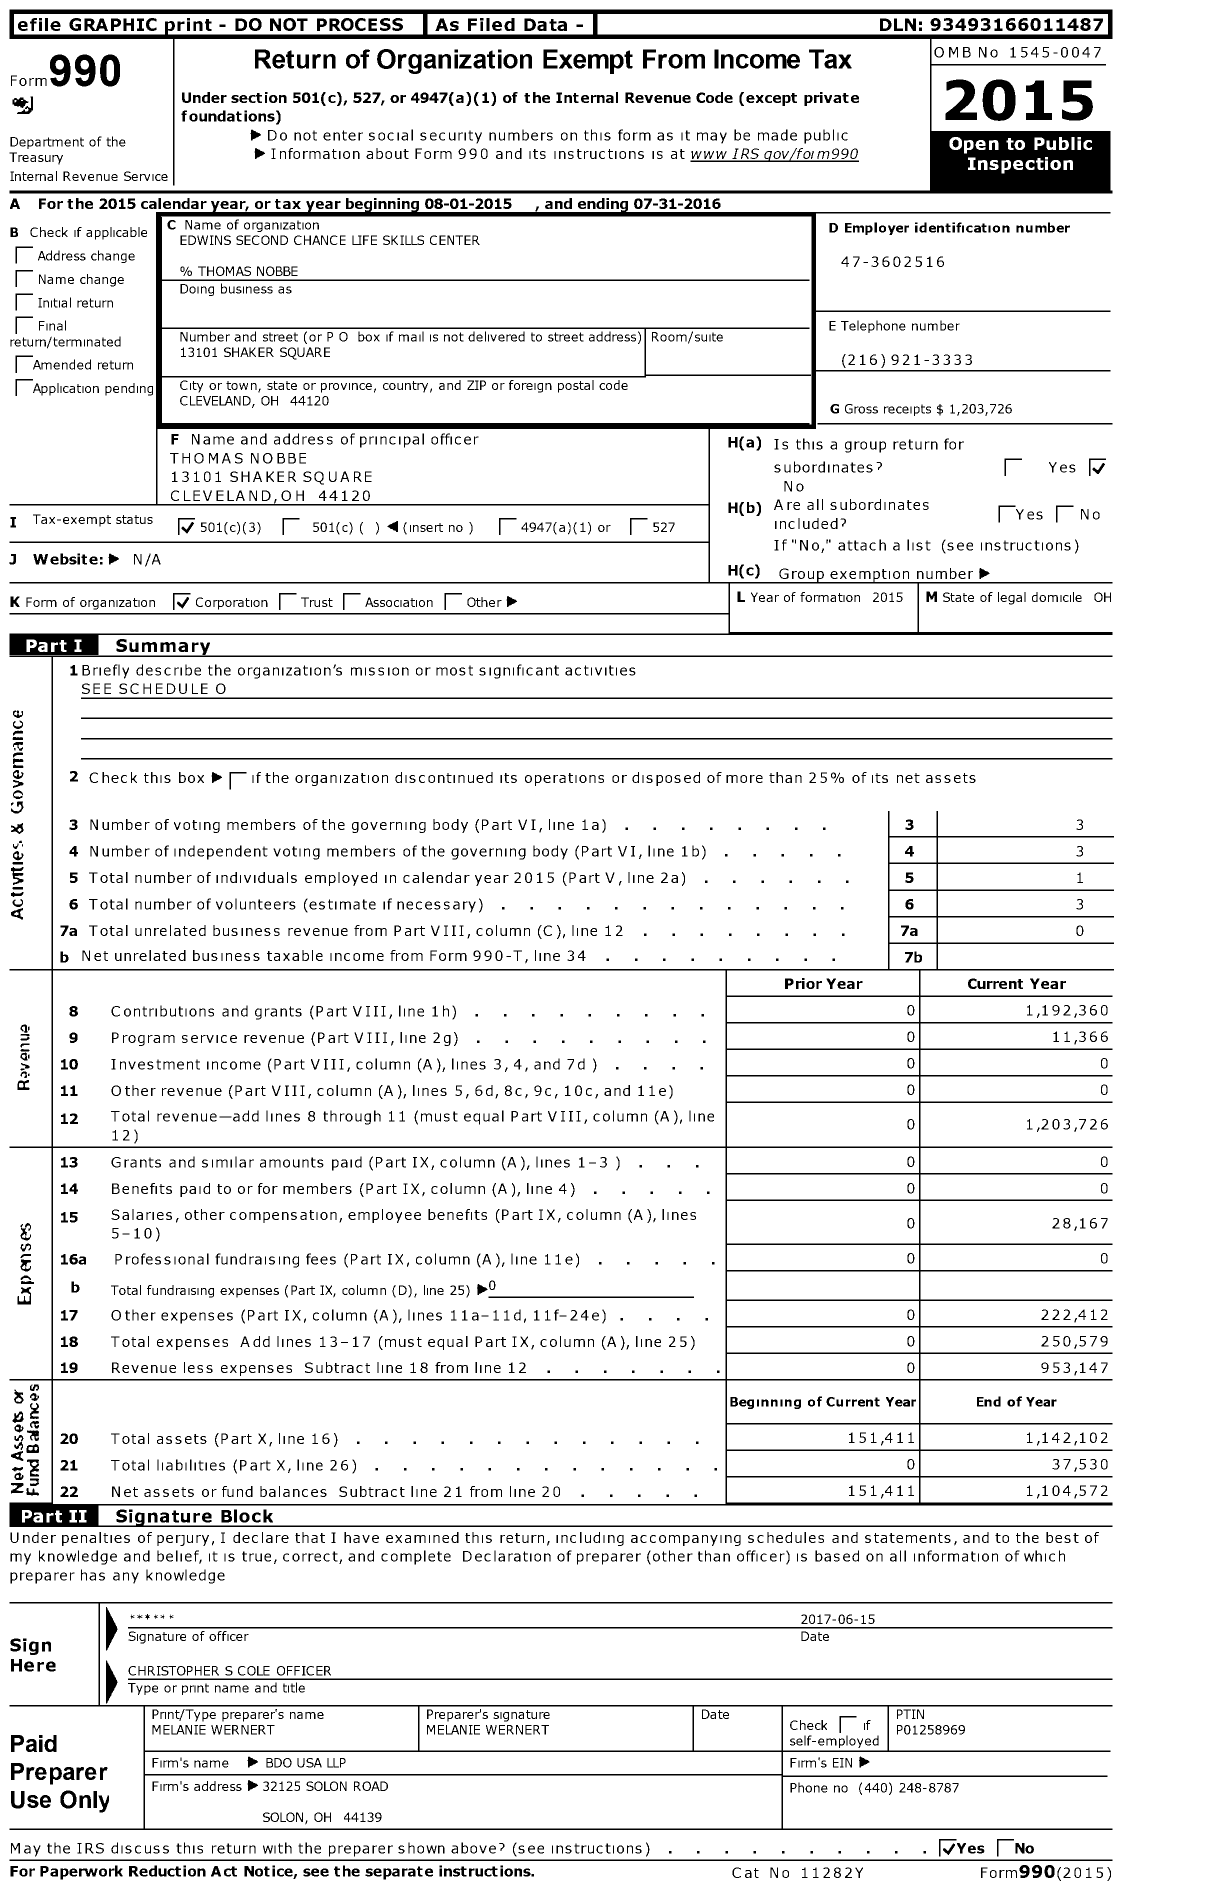 Image of first page of 2015 Form 990 for Edwins Second Chance Life Skills Center